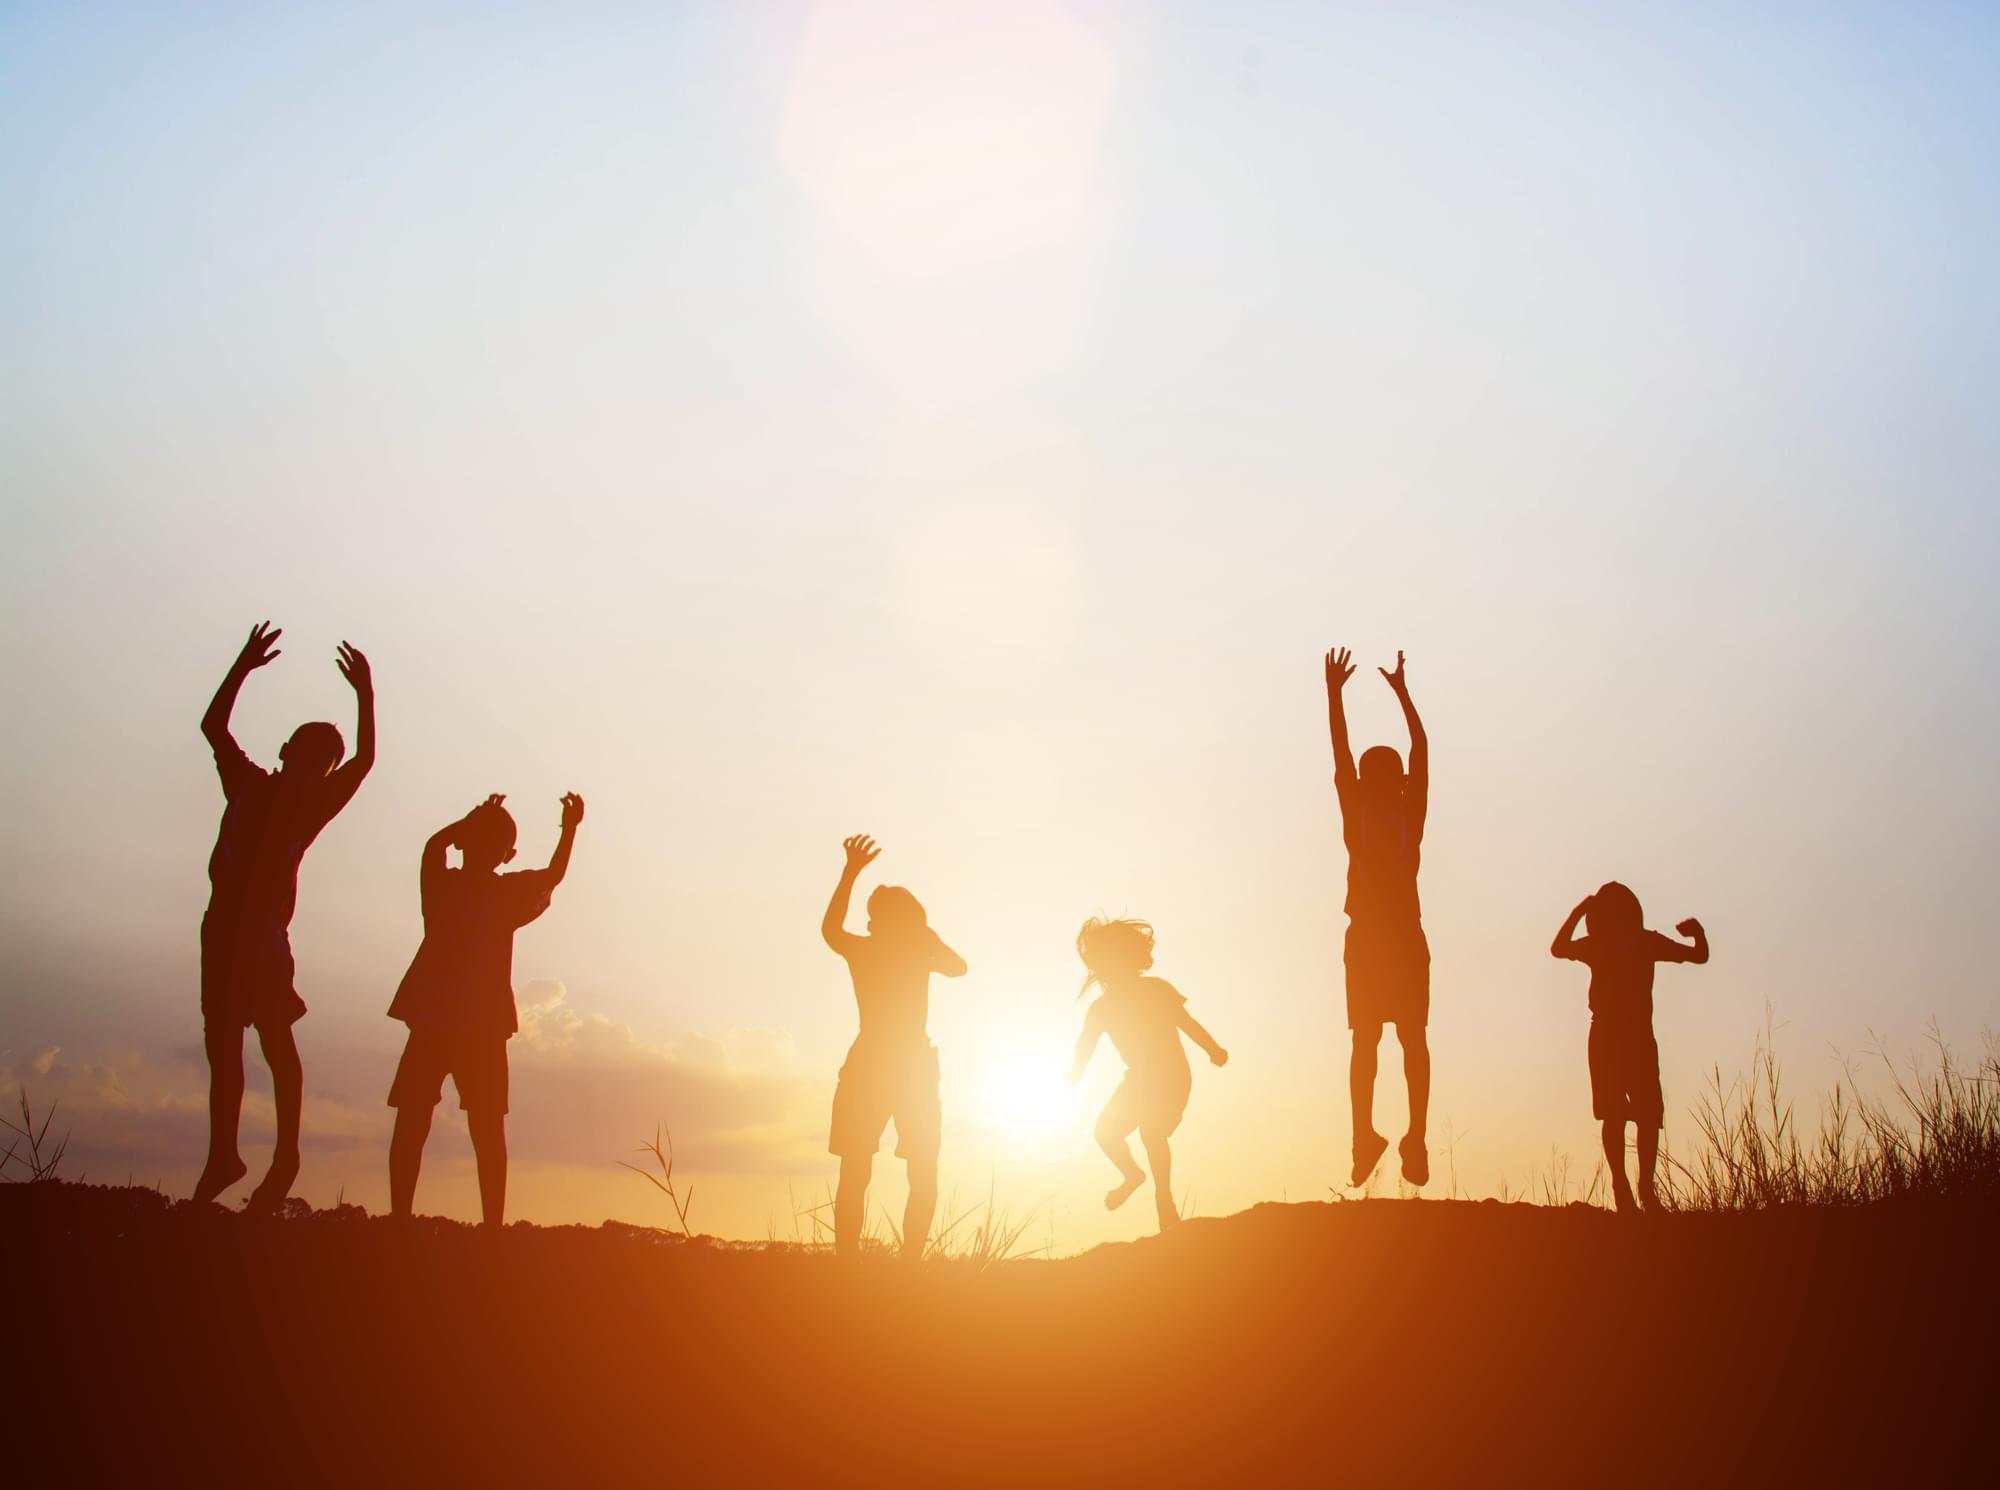 Silhouettes of six children playing outside hands joyfully raised in the air with sunset in background